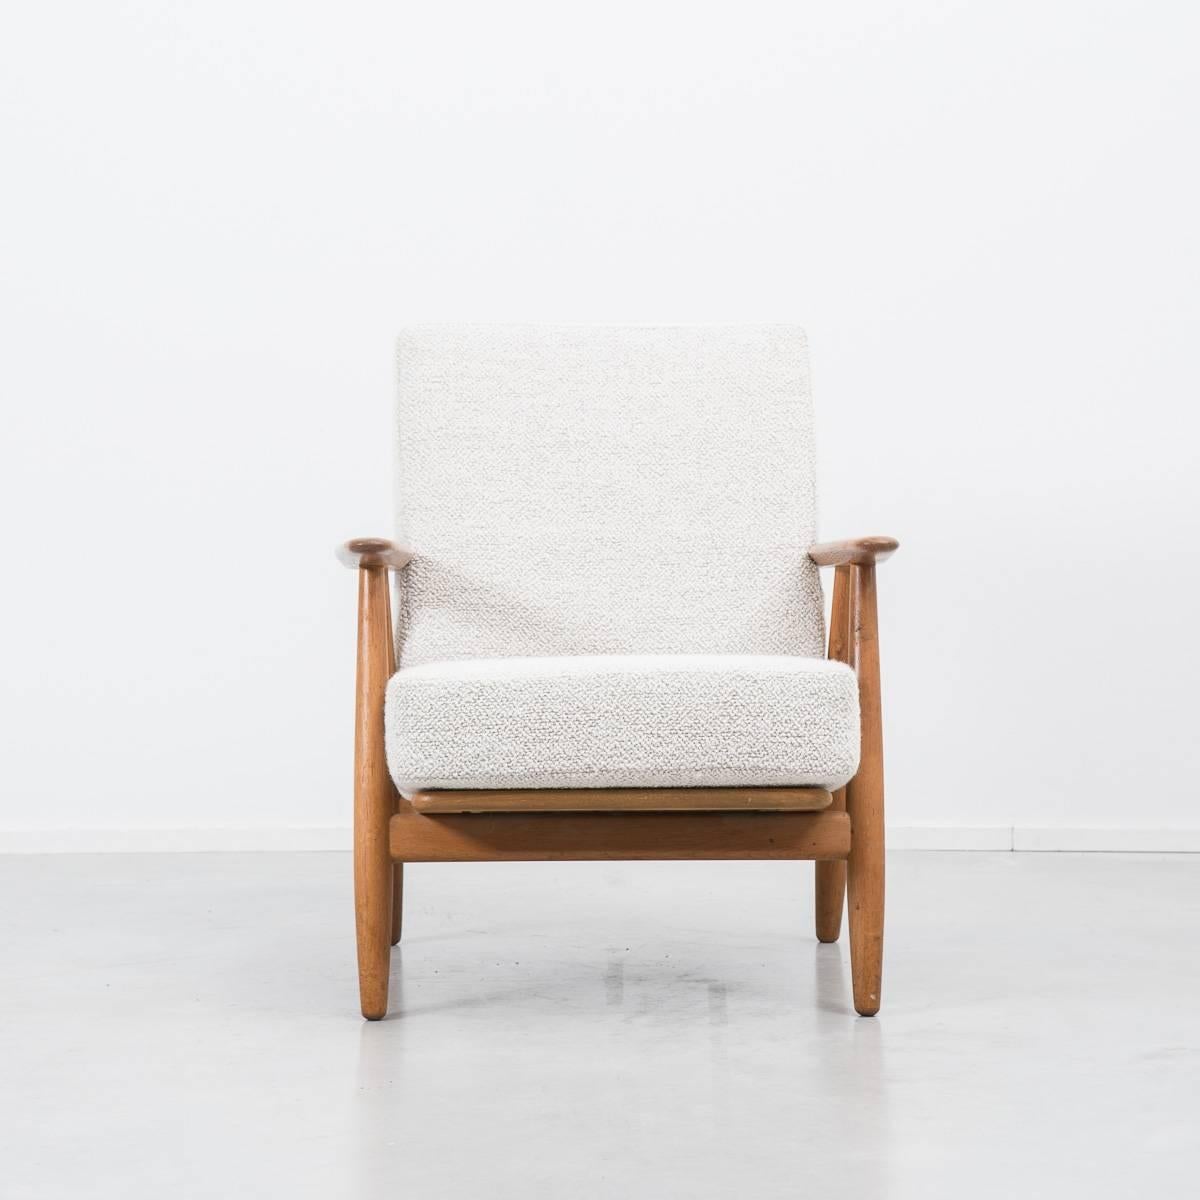 This Danish armchair in oak was designed by Hans J Wegner (1917-2007) in 1955 for GETAMA. Wegner is considered a pioneering furniture designer and master cabinetmaker and had a prolific output of seating during his working life. This chair is model